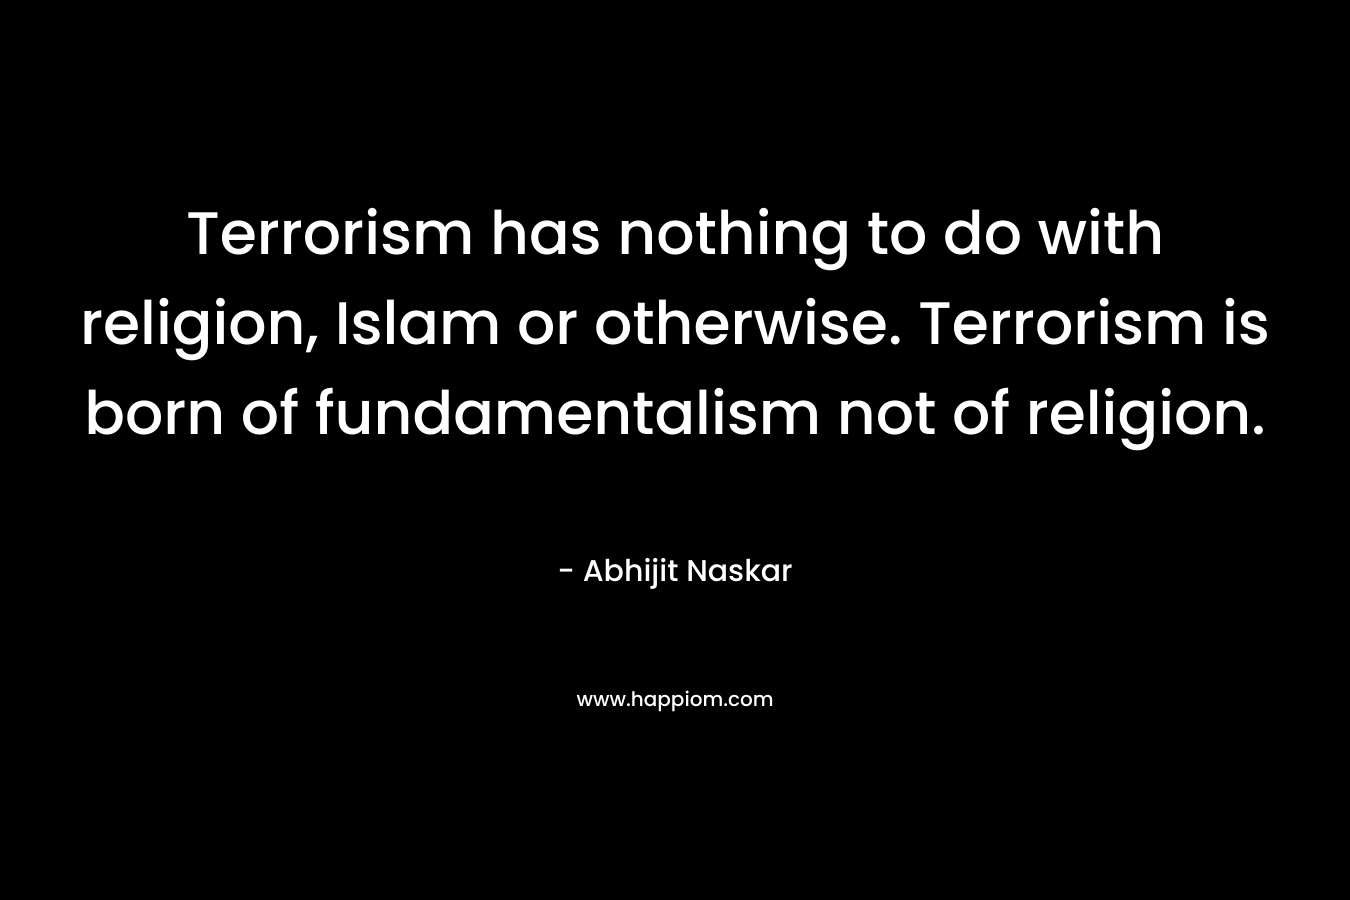 Terrorism has nothing to do with religion, Islam or otherwise. Terrorism is born of fundamentalism not of religion.